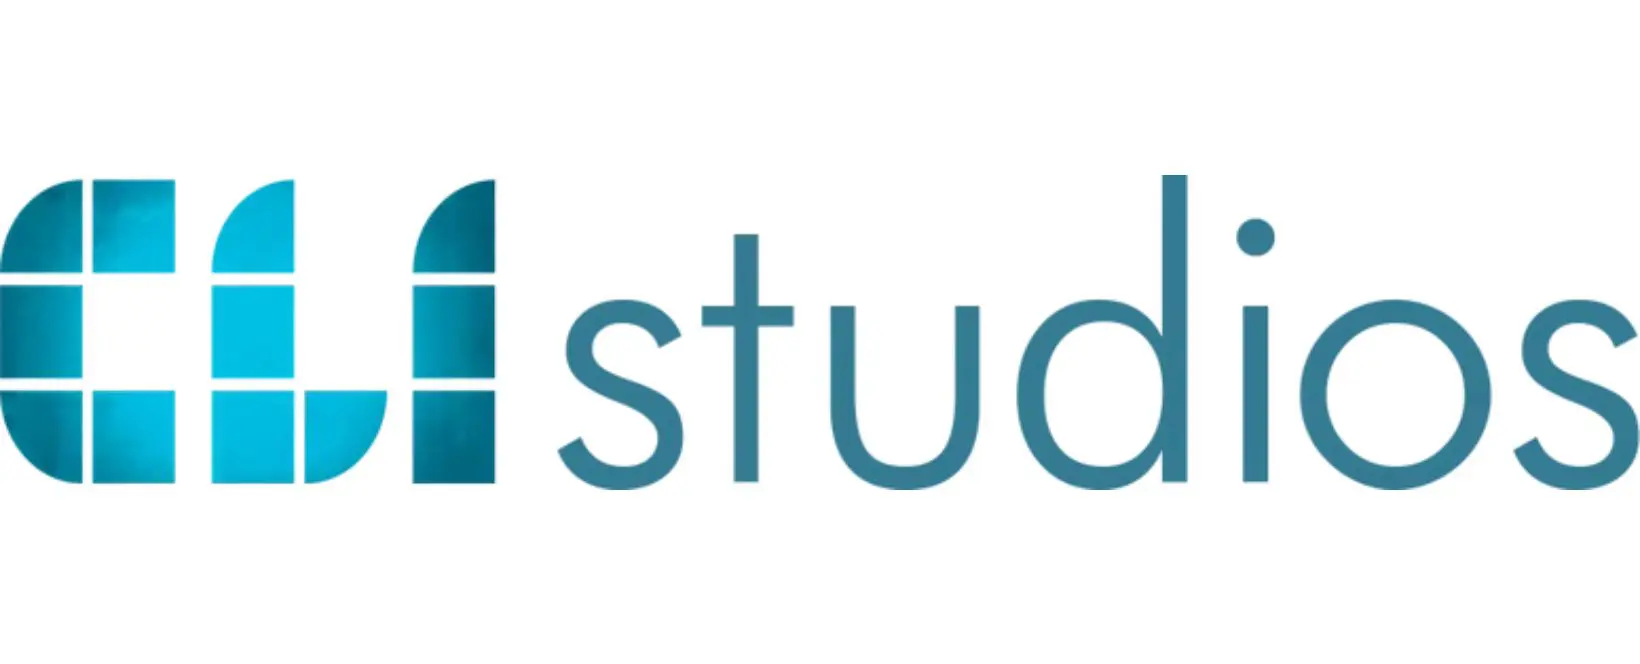 A logo of the word studio